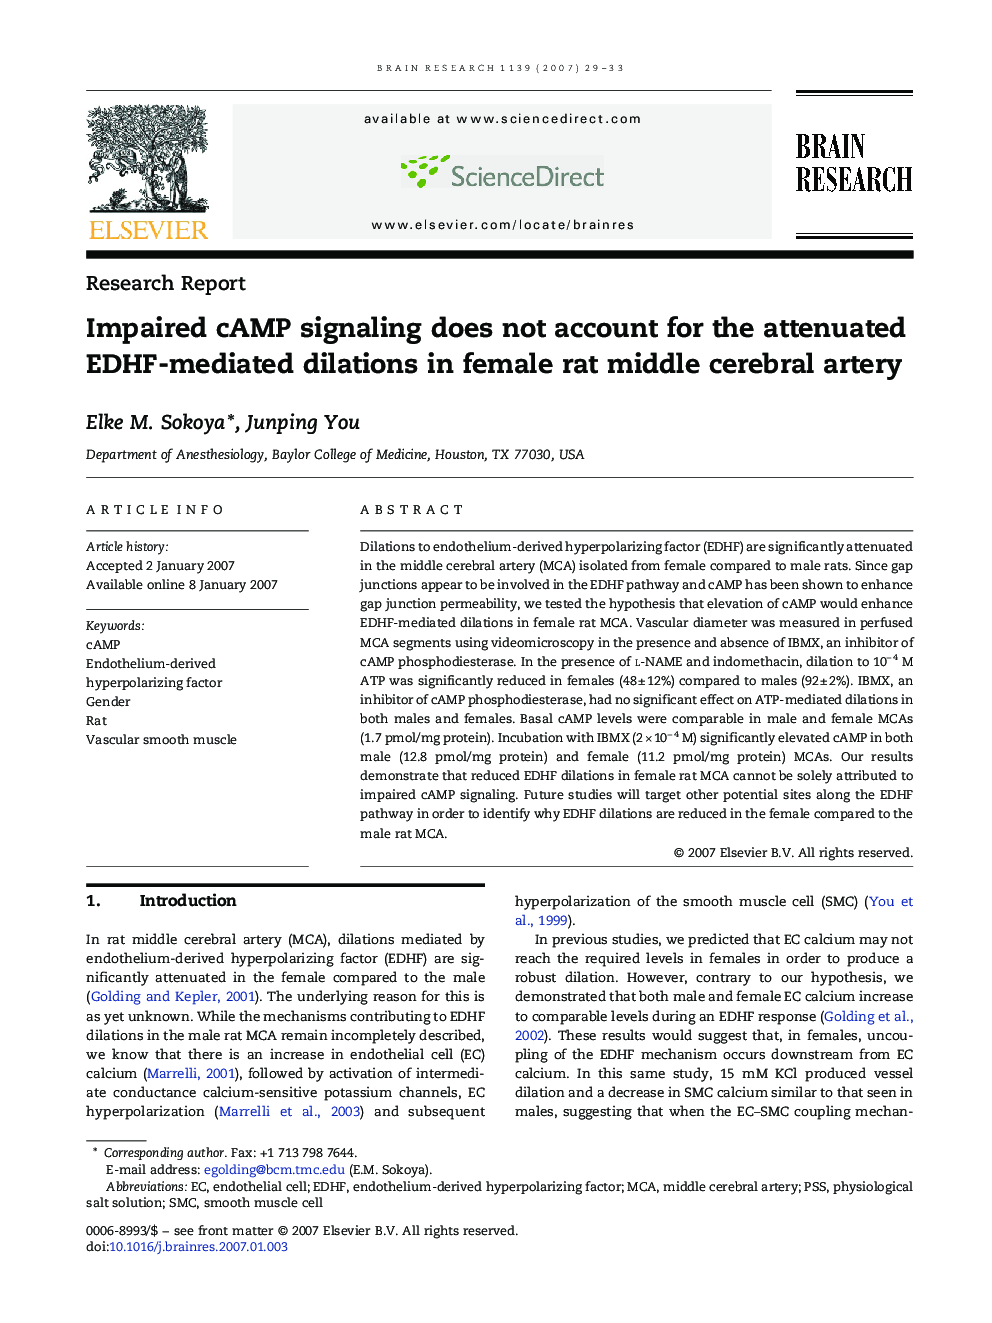 Impaired cAMP signaling does not account for the attenuated EDHF-mediated dilations in female rat middle cerebral artery